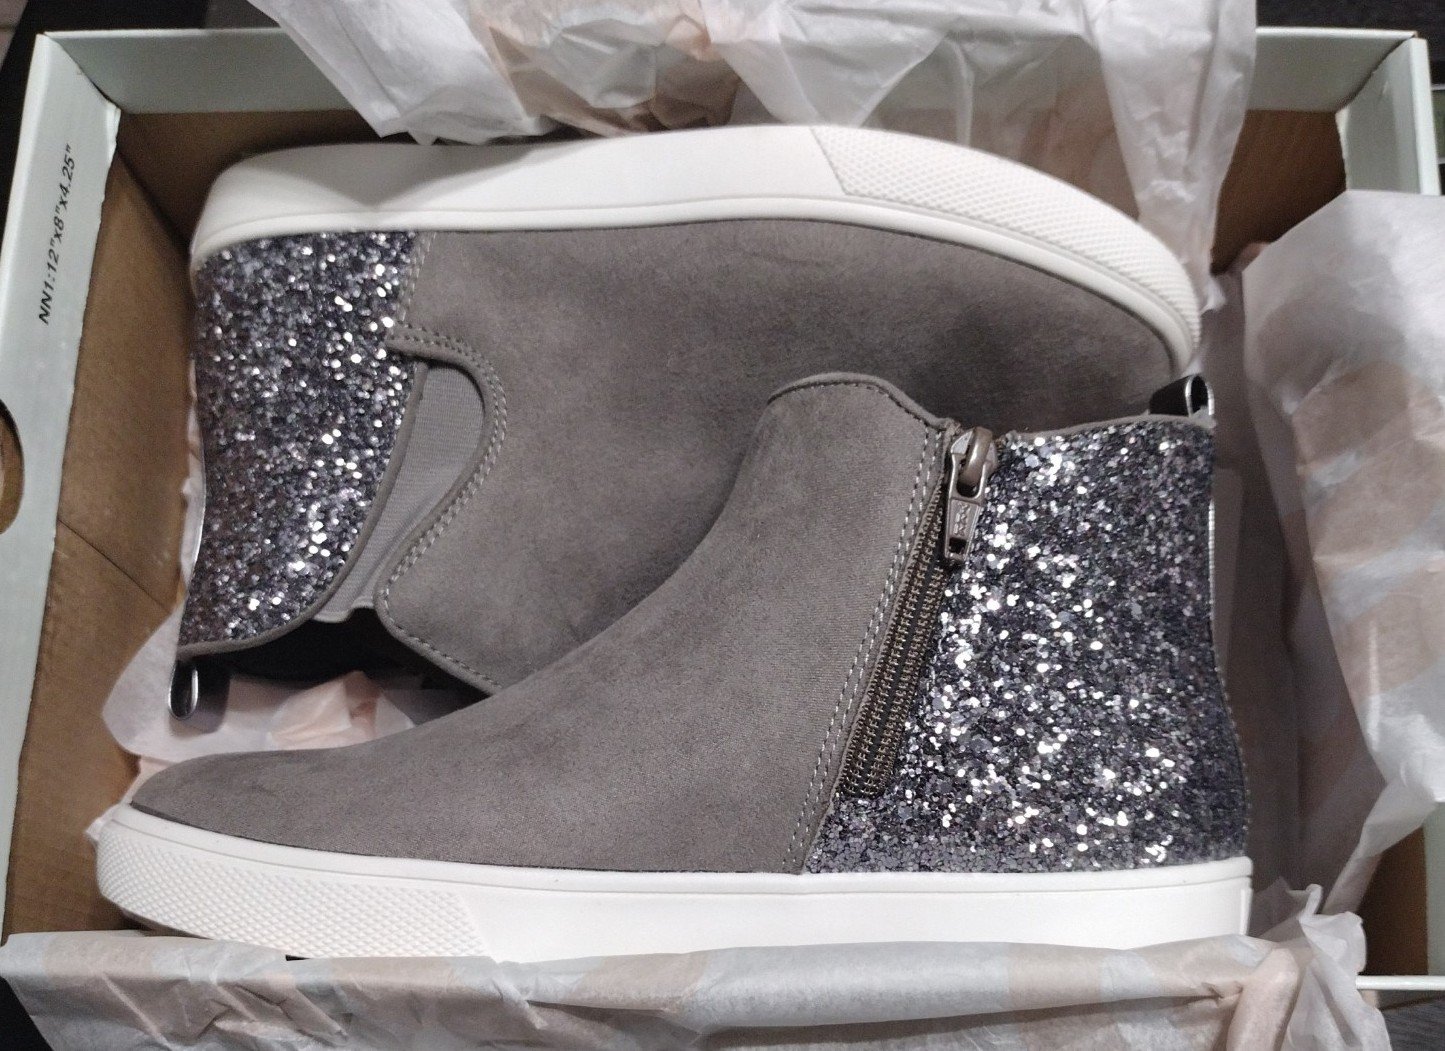 Shoes for girls, SO brand pewter gray sparkly color, new size 3 53tEdeXbn